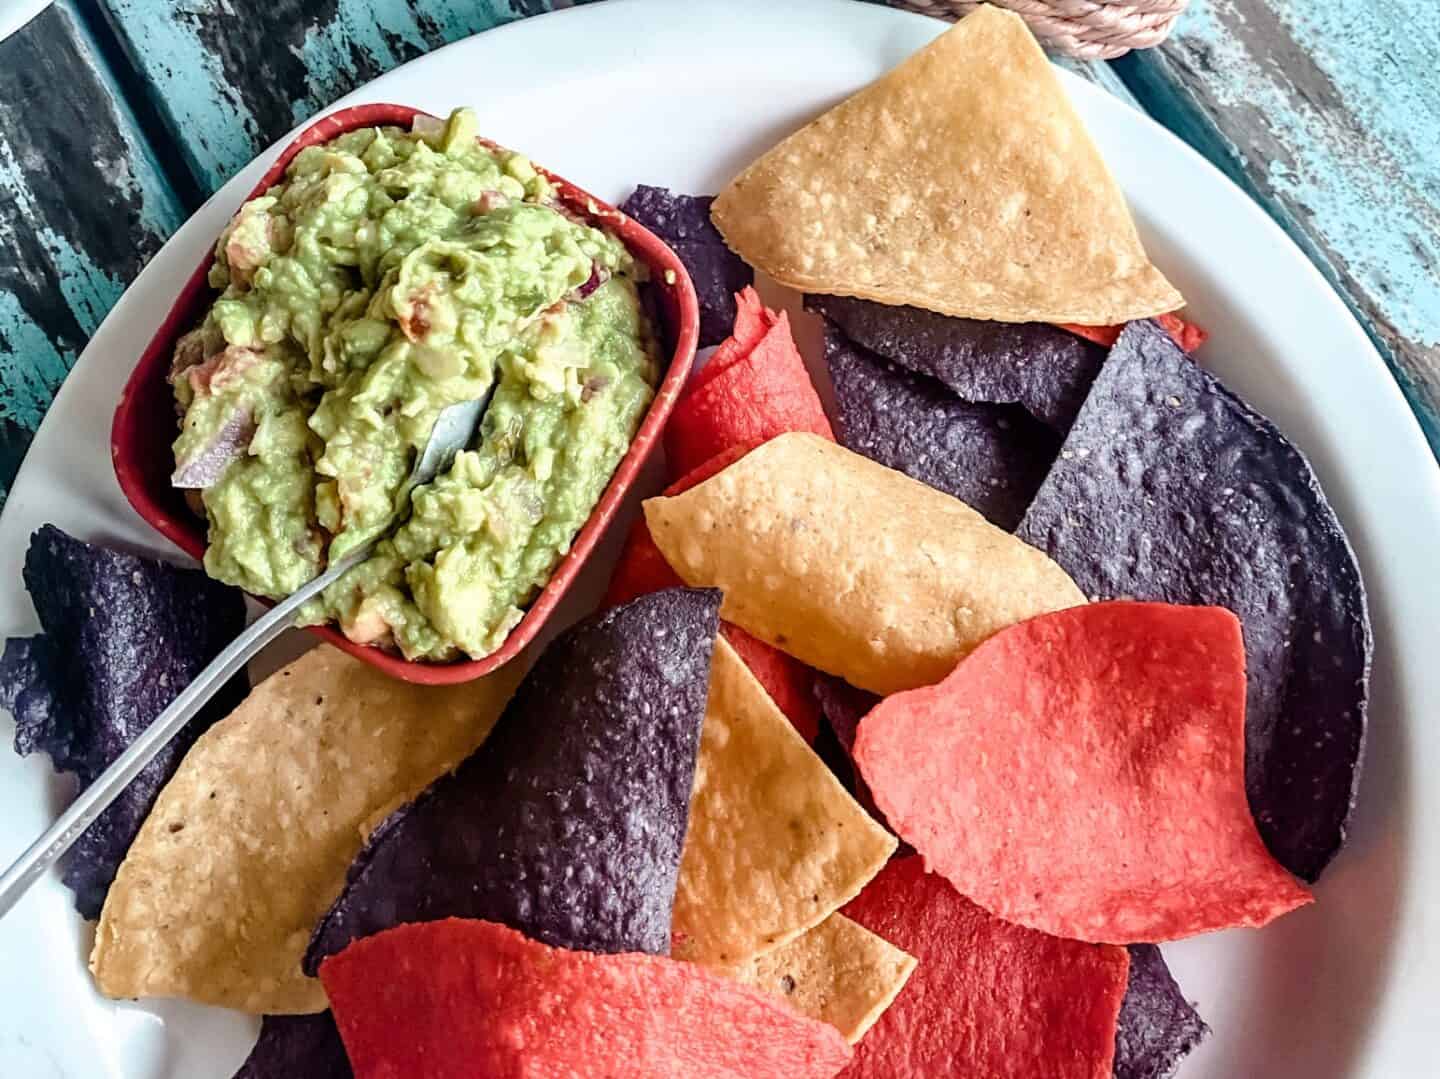 Guac and chips from Ginger's Grill